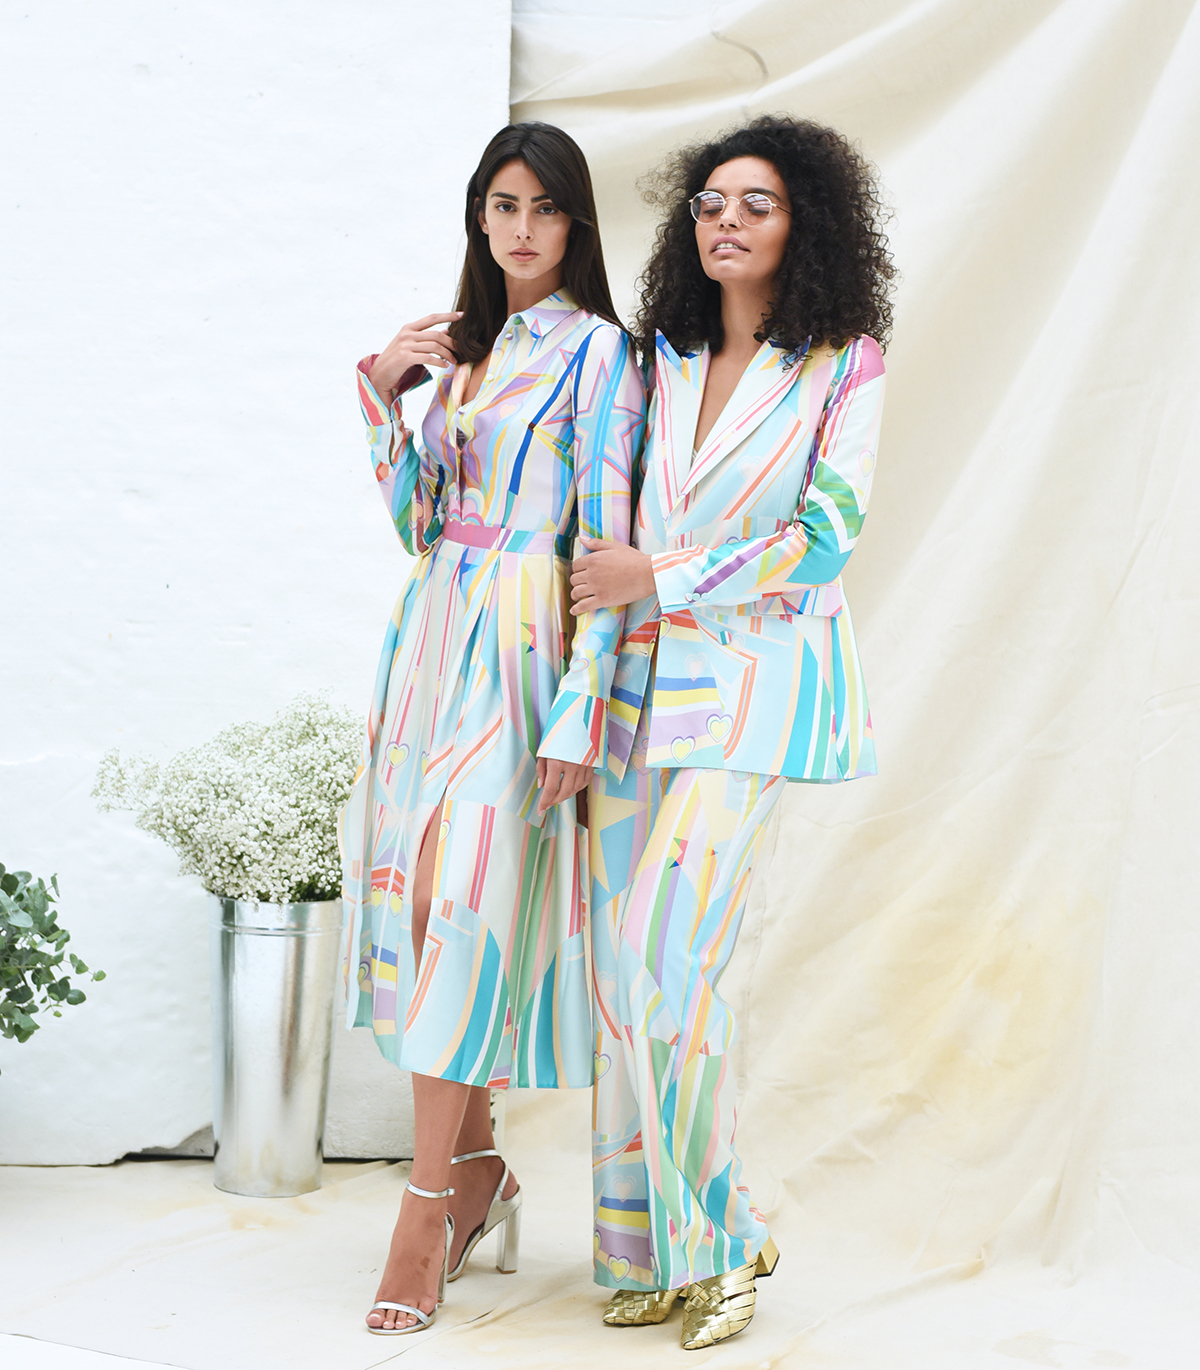 Skeena S lookbook with two models wearing pastel coloured suits